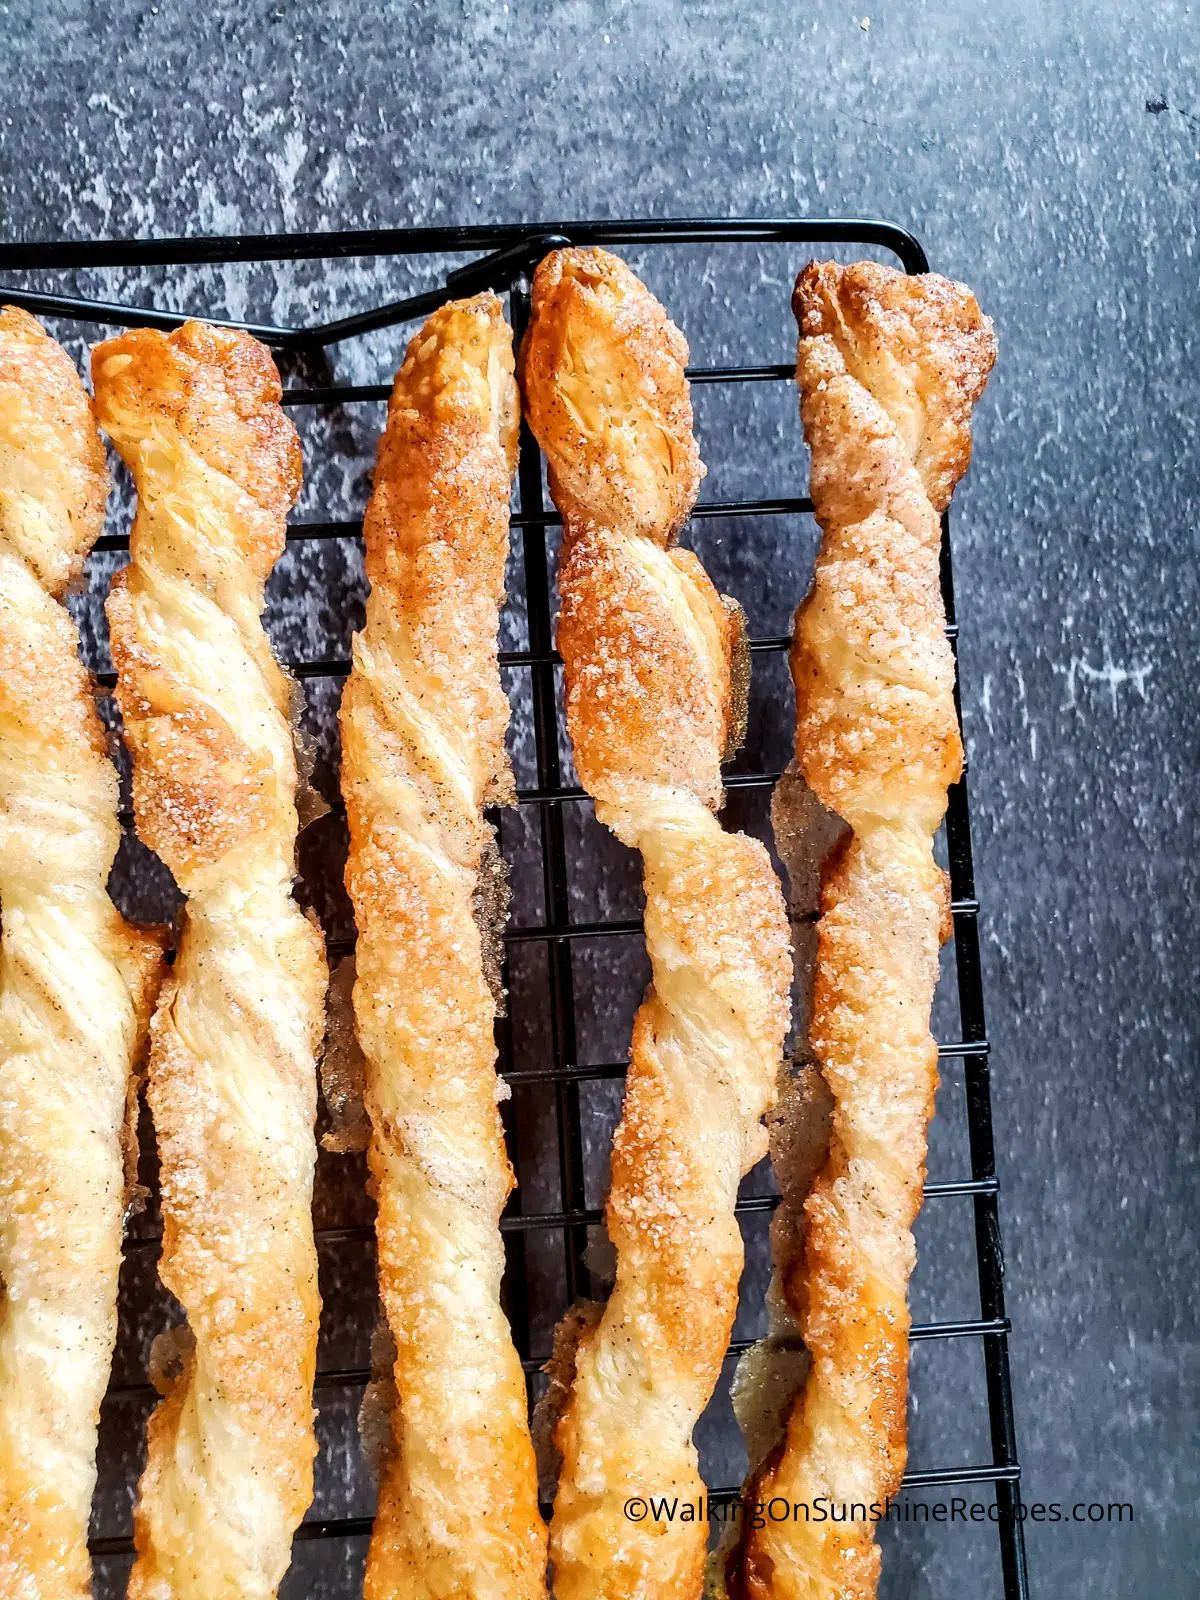 Baked puff pastry cinnamon twists cooling on baking rack.